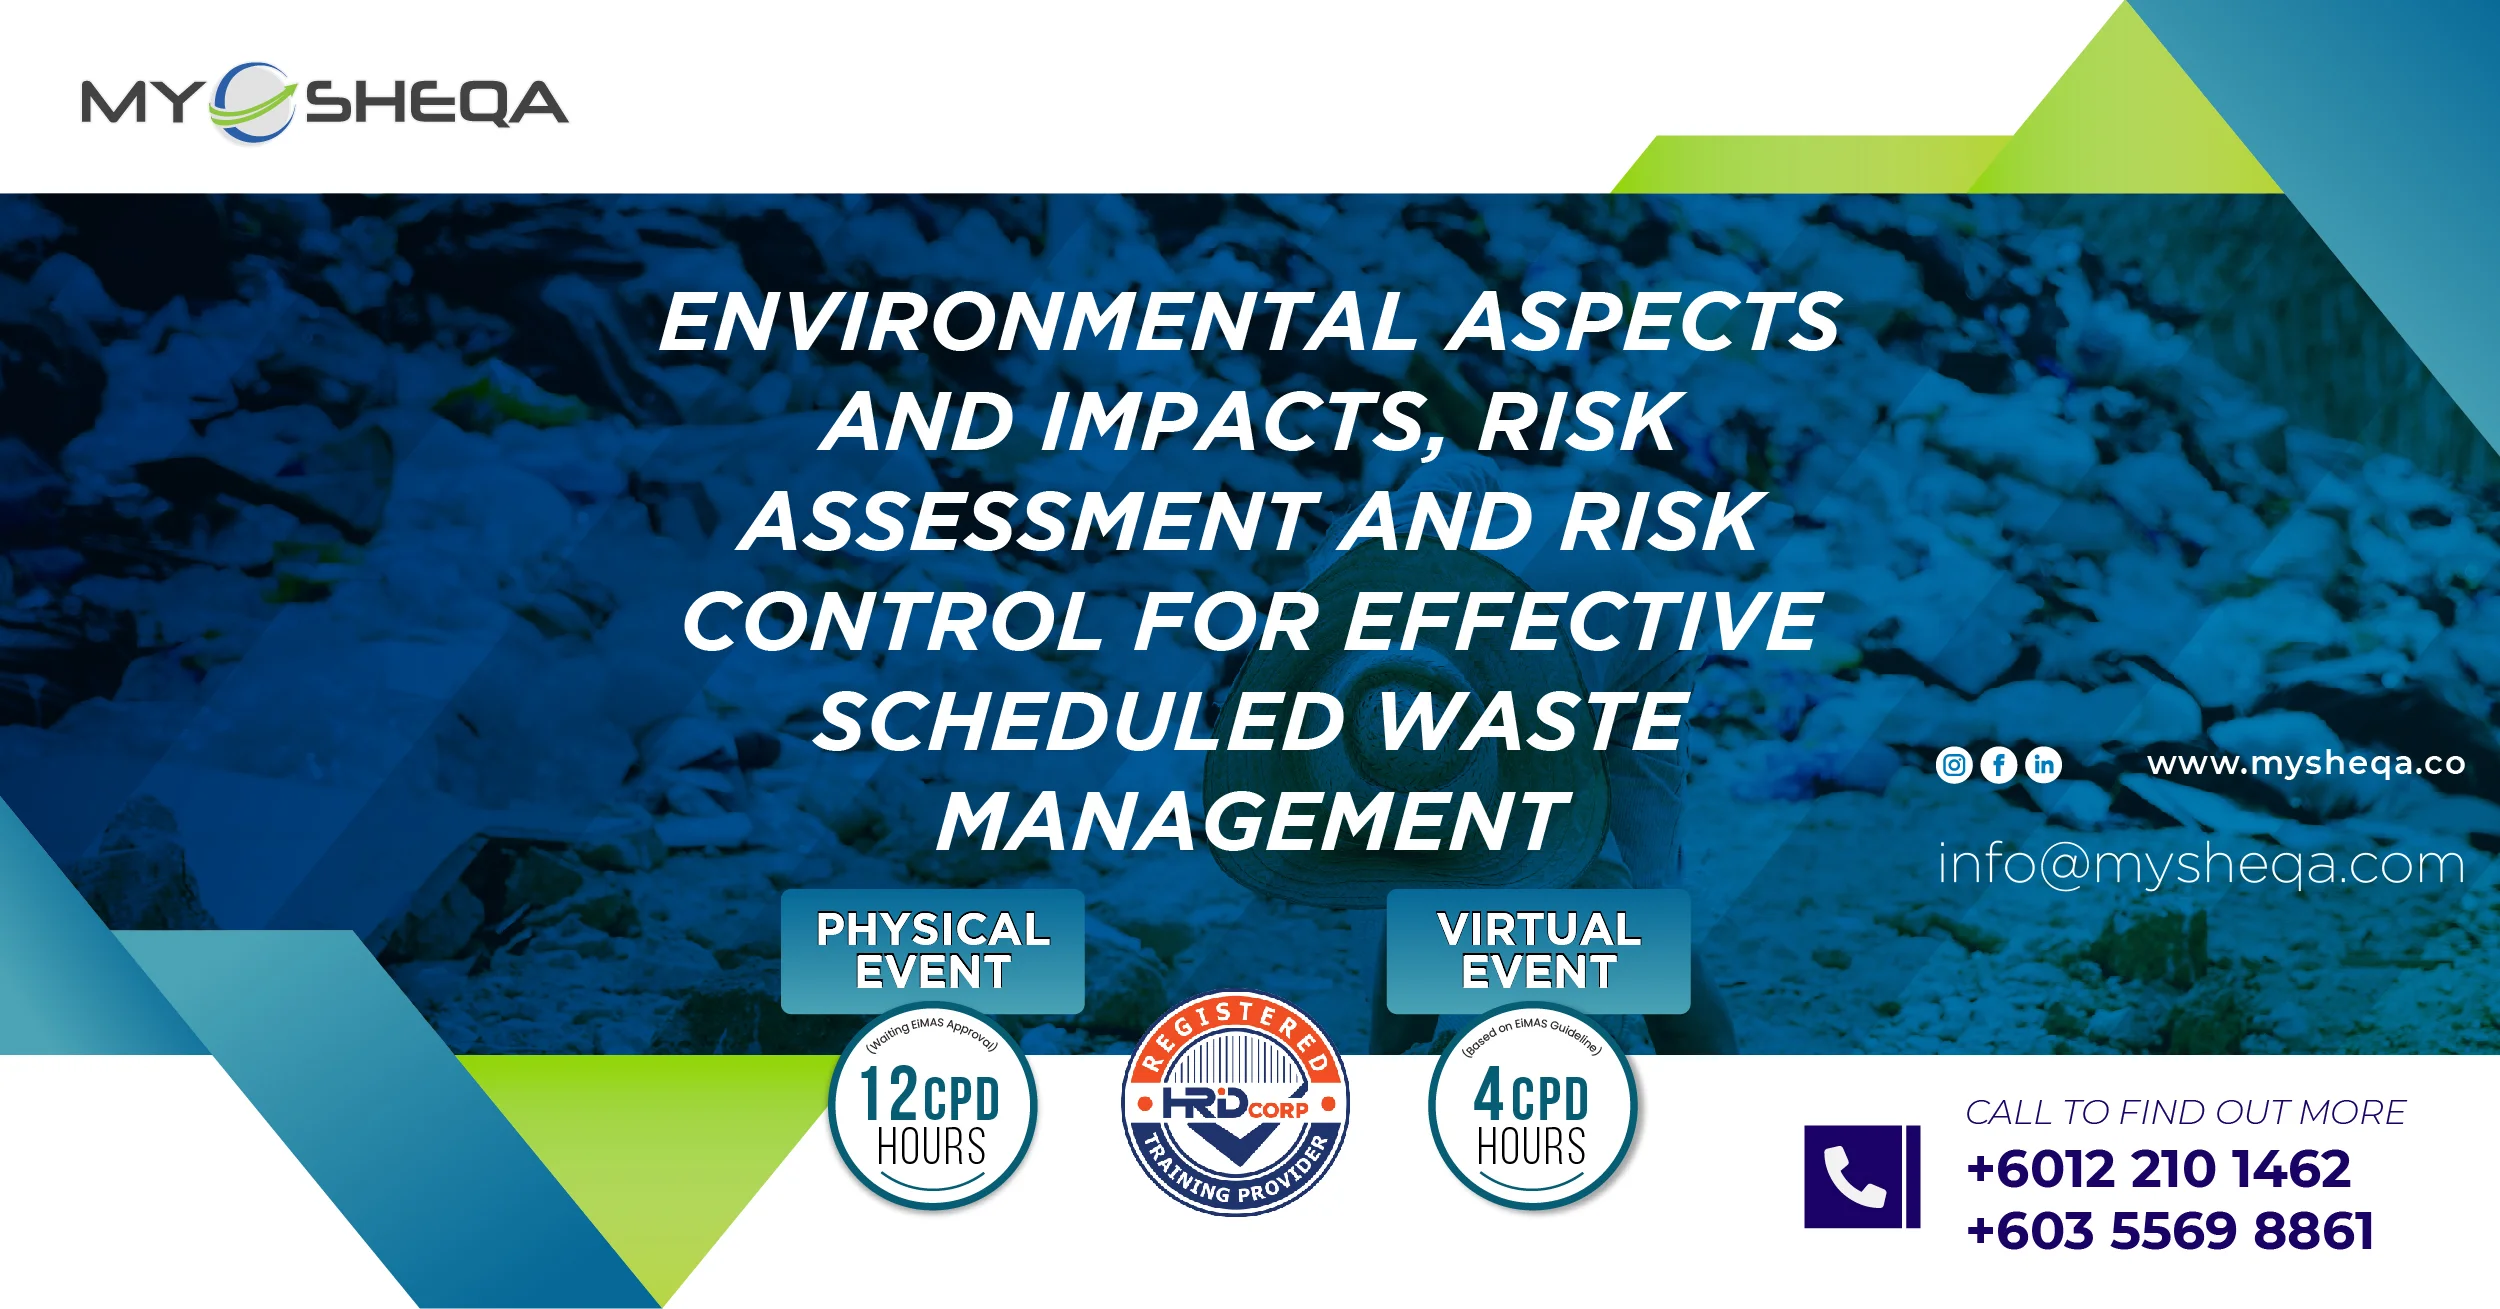 Environmental Aspects and Impacts, Risk Assessment and Risk Control for Effective Scheduled Waste Management